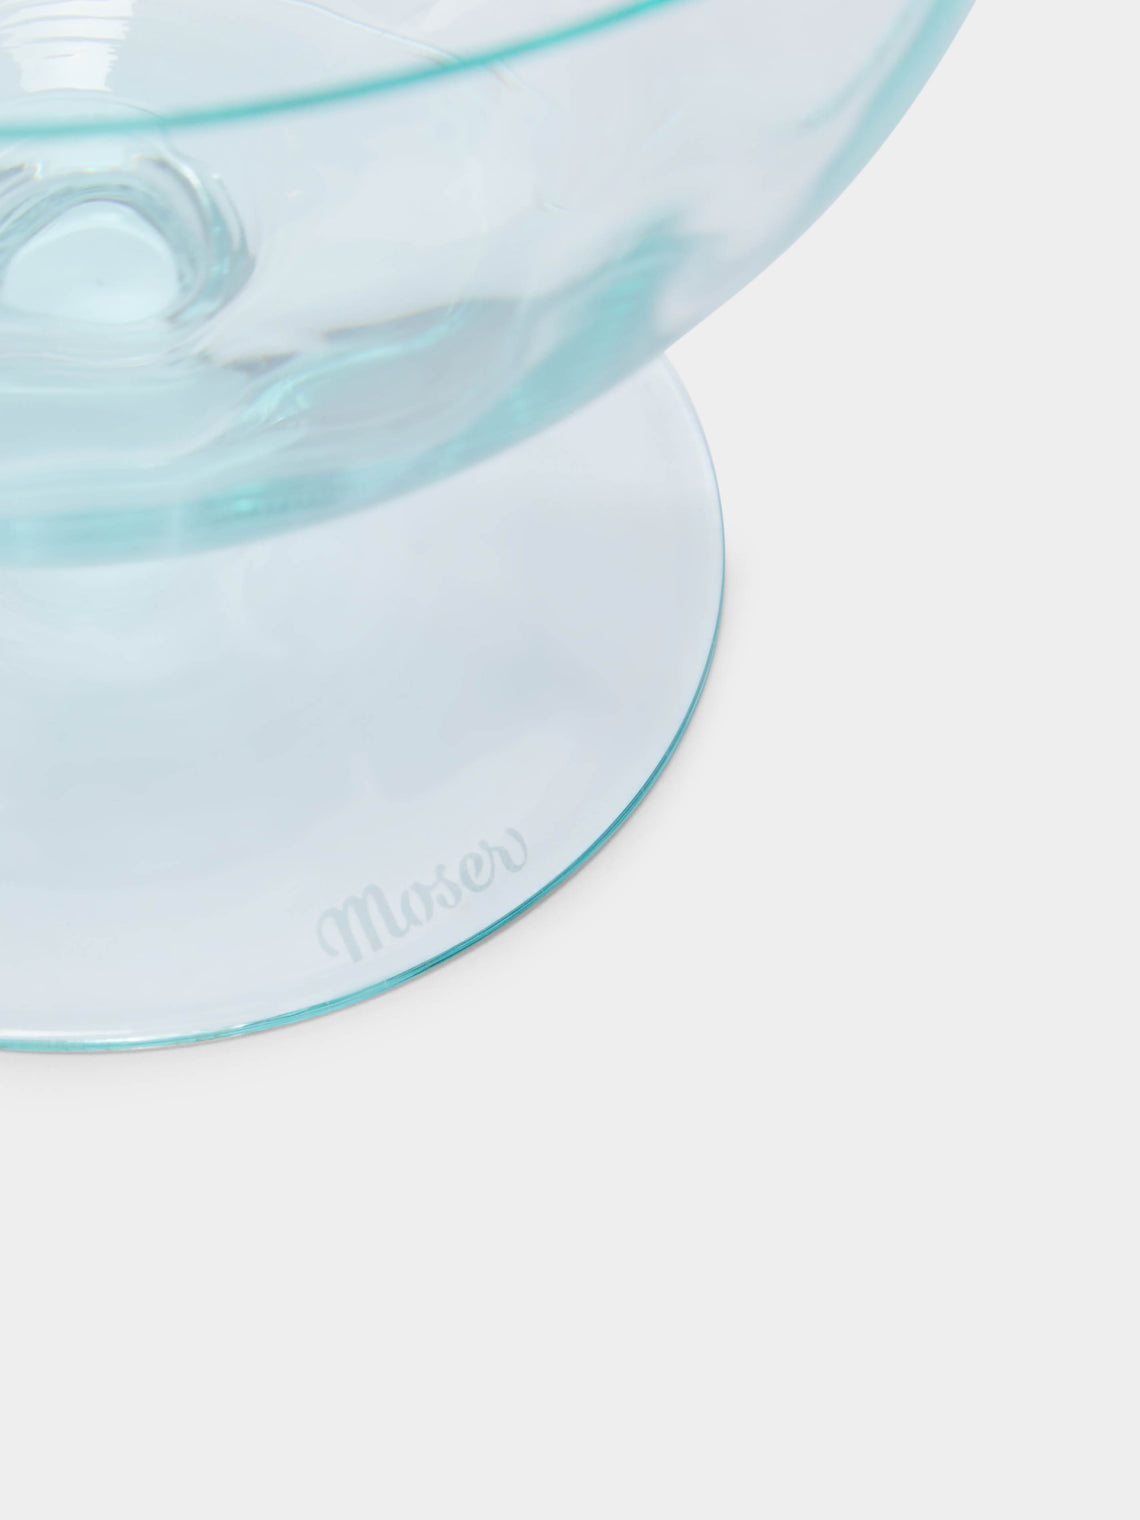 Moser - Optic Hand-Blown Crystal Ice Cream Bowl -  - ABASK